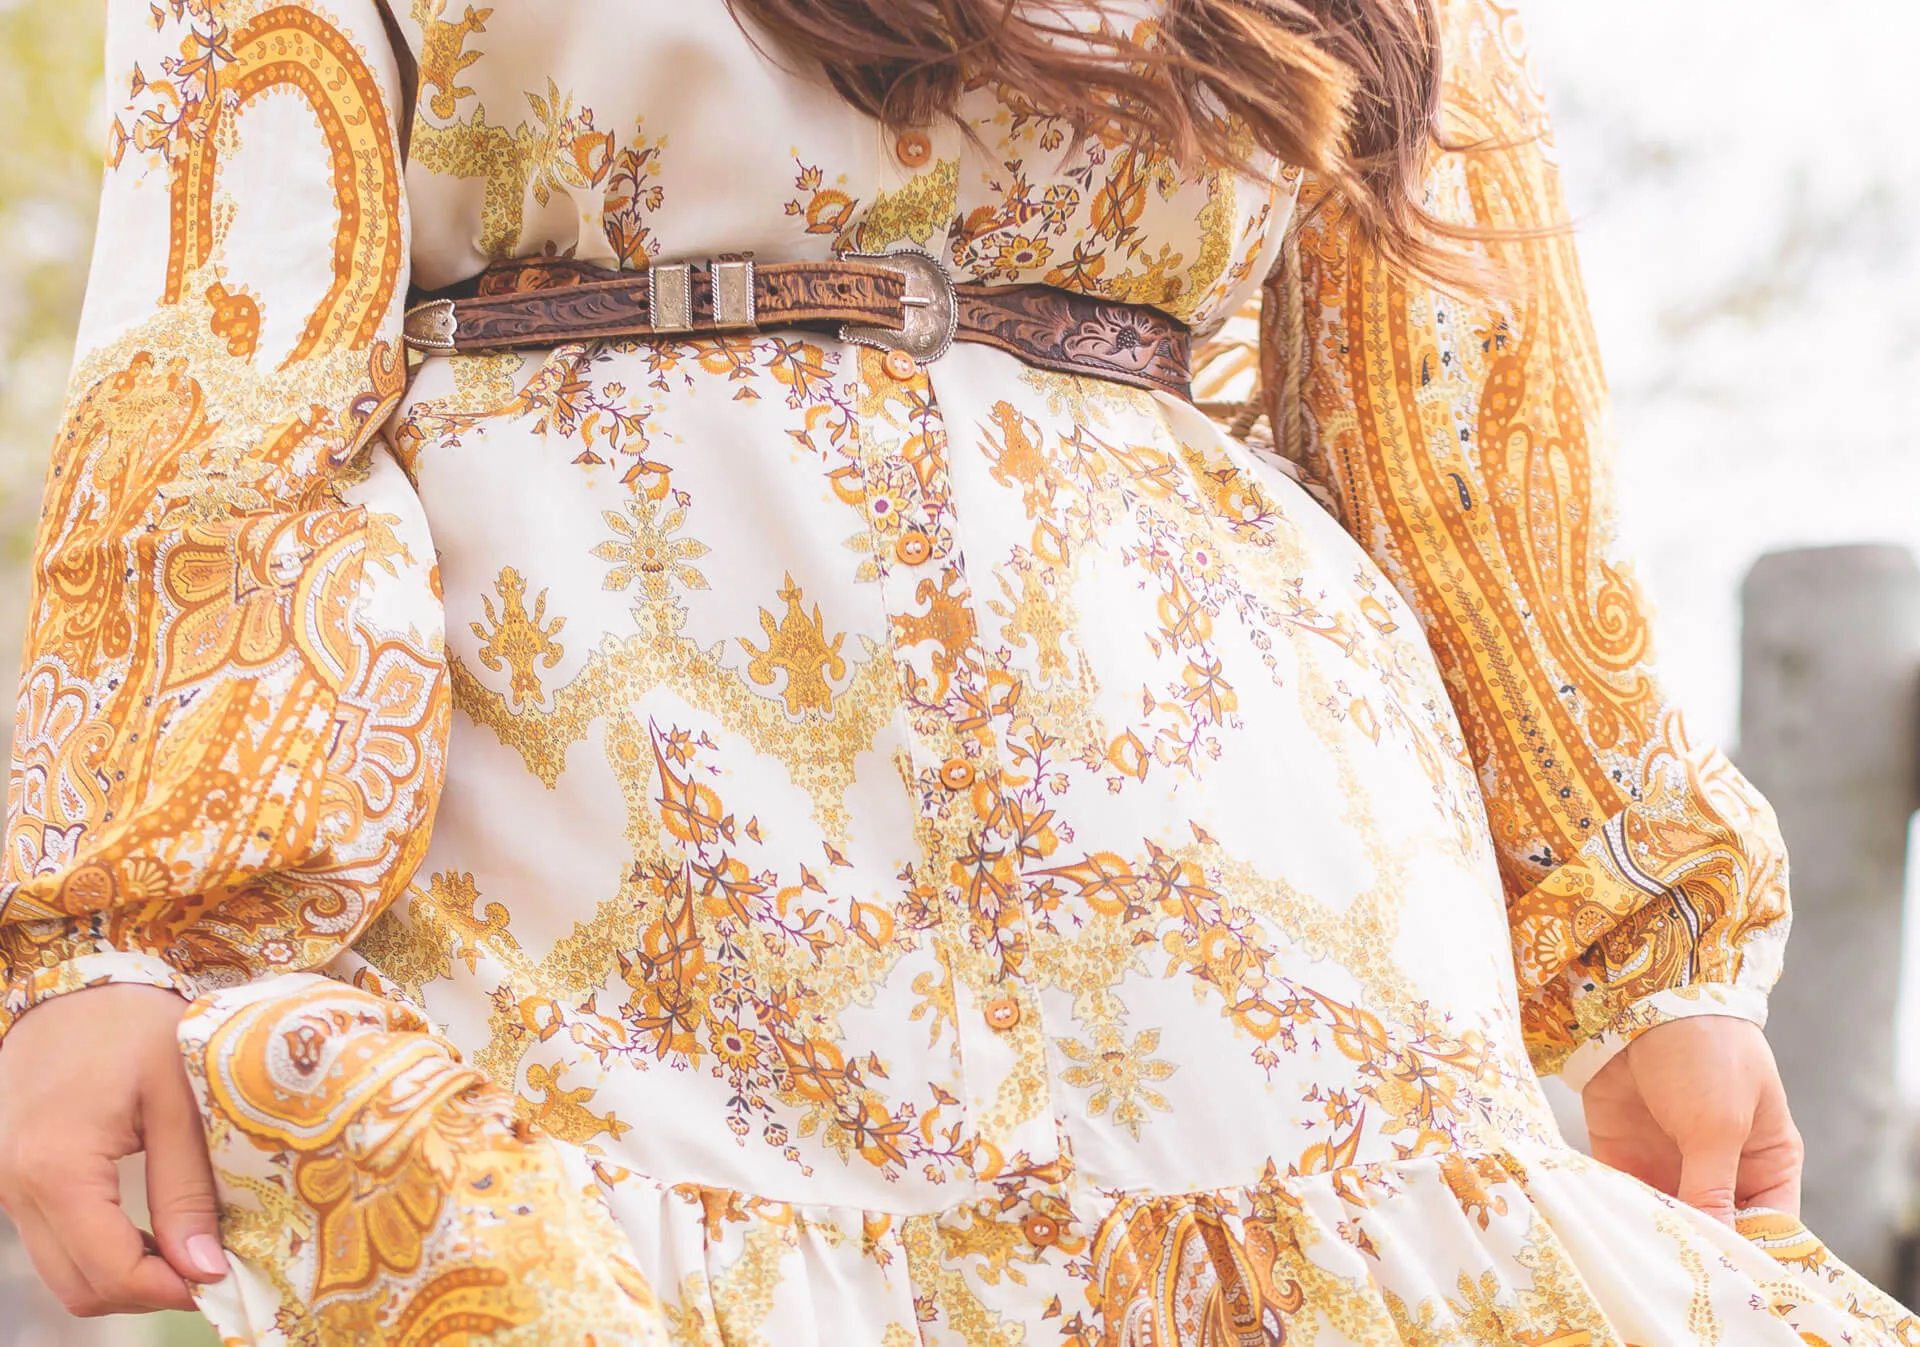 A belt is a great complement to your flowy dress